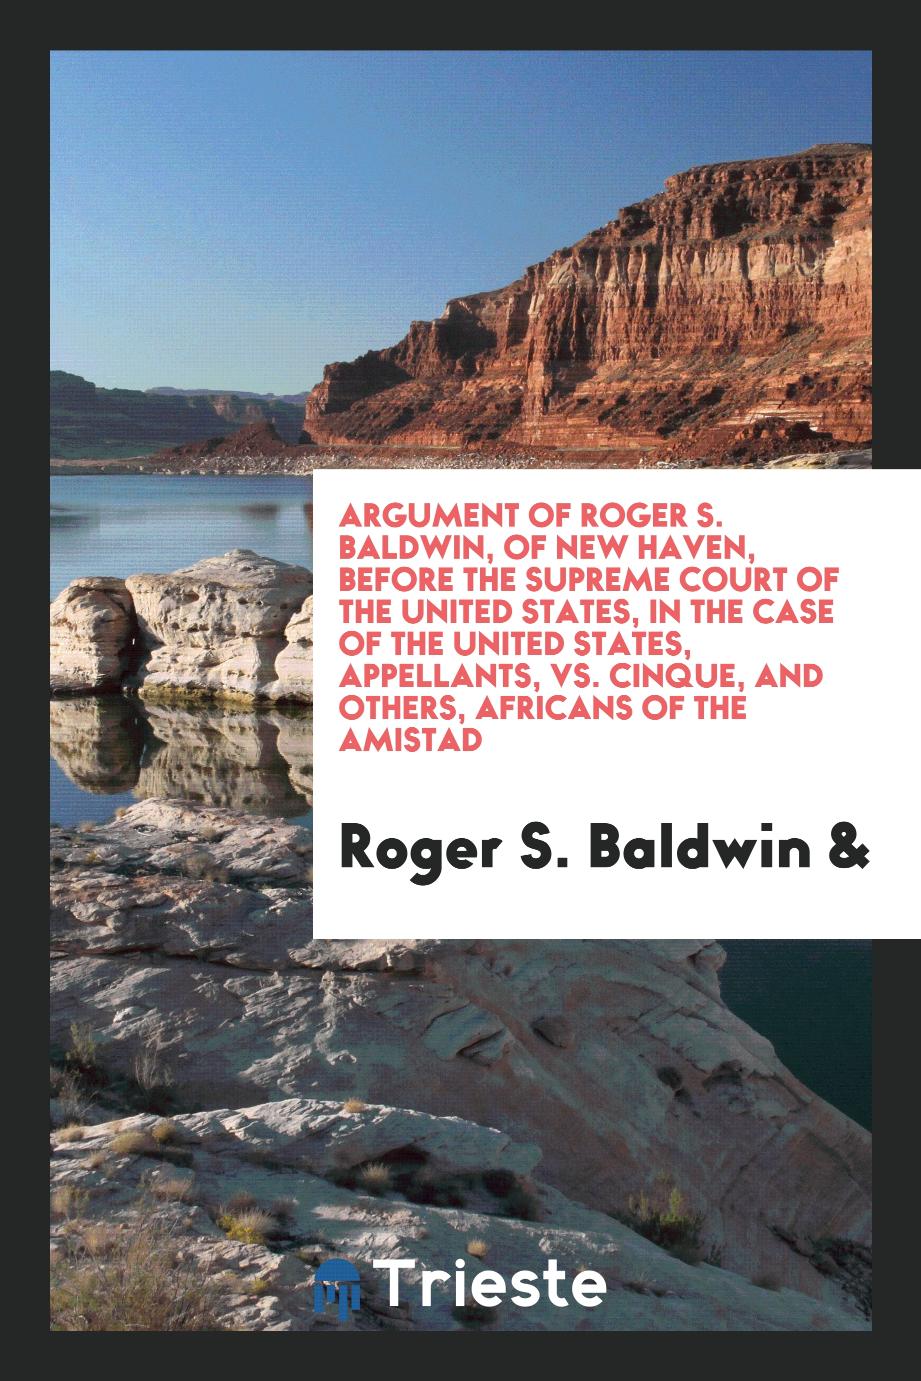 Argument of Roger S. Baldwin, of New Haven, Before the Supreme Court of the United States, in the Case of the United States, Appellants, vs. Cinque, and Others, Africans of the Amistad